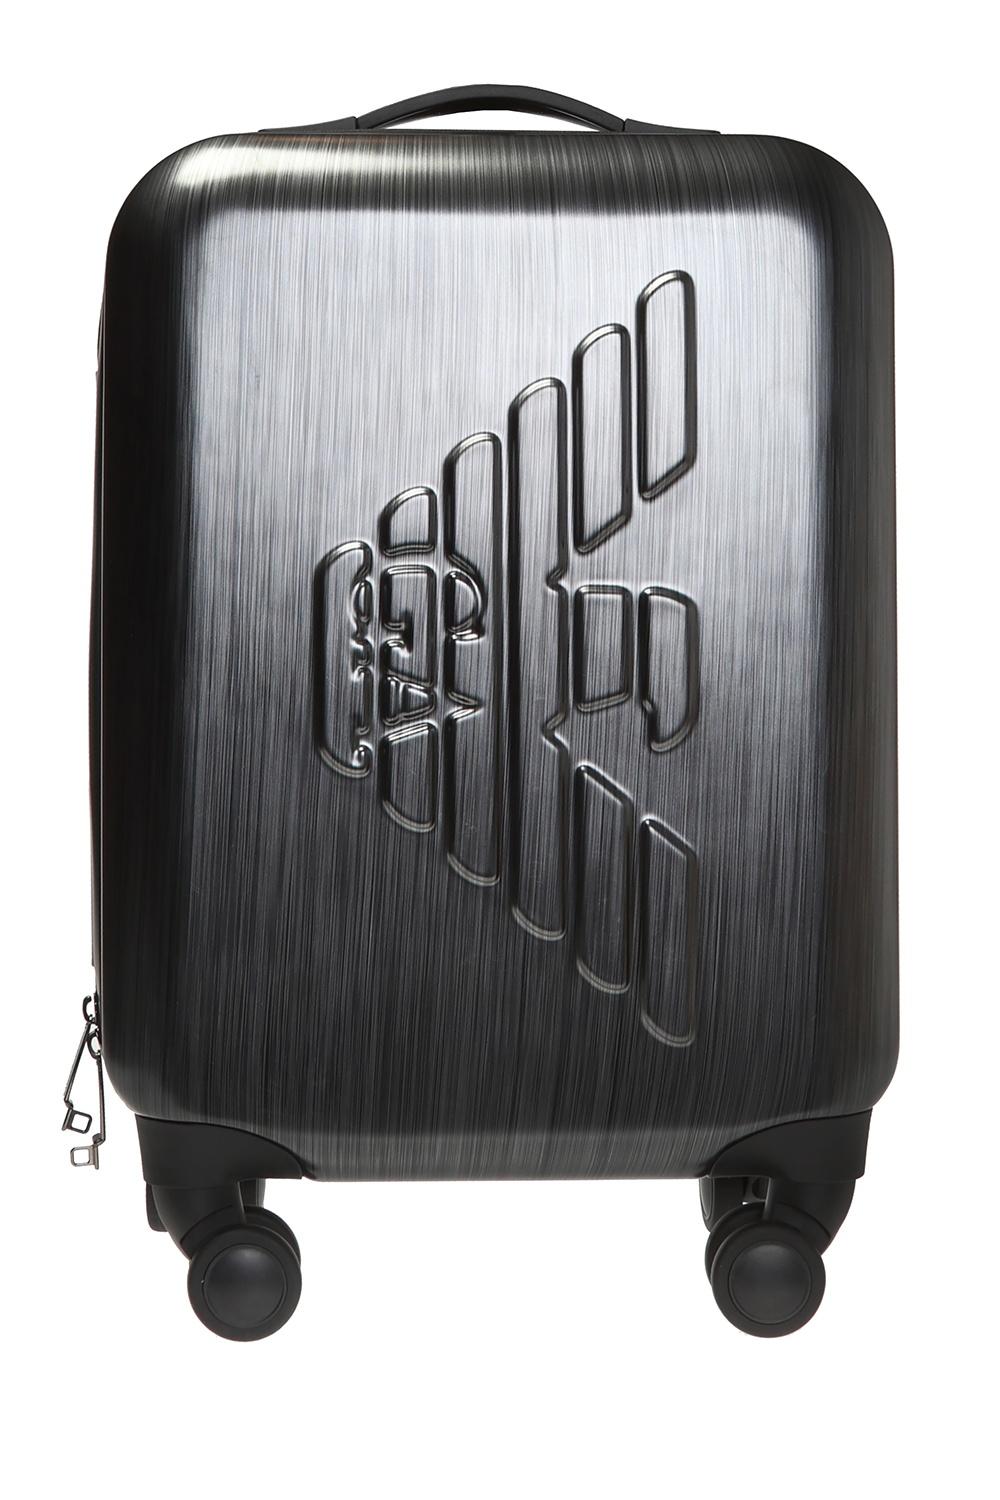 Emporio Armani Carry On Luggage Sales Cheap, Save 50% 